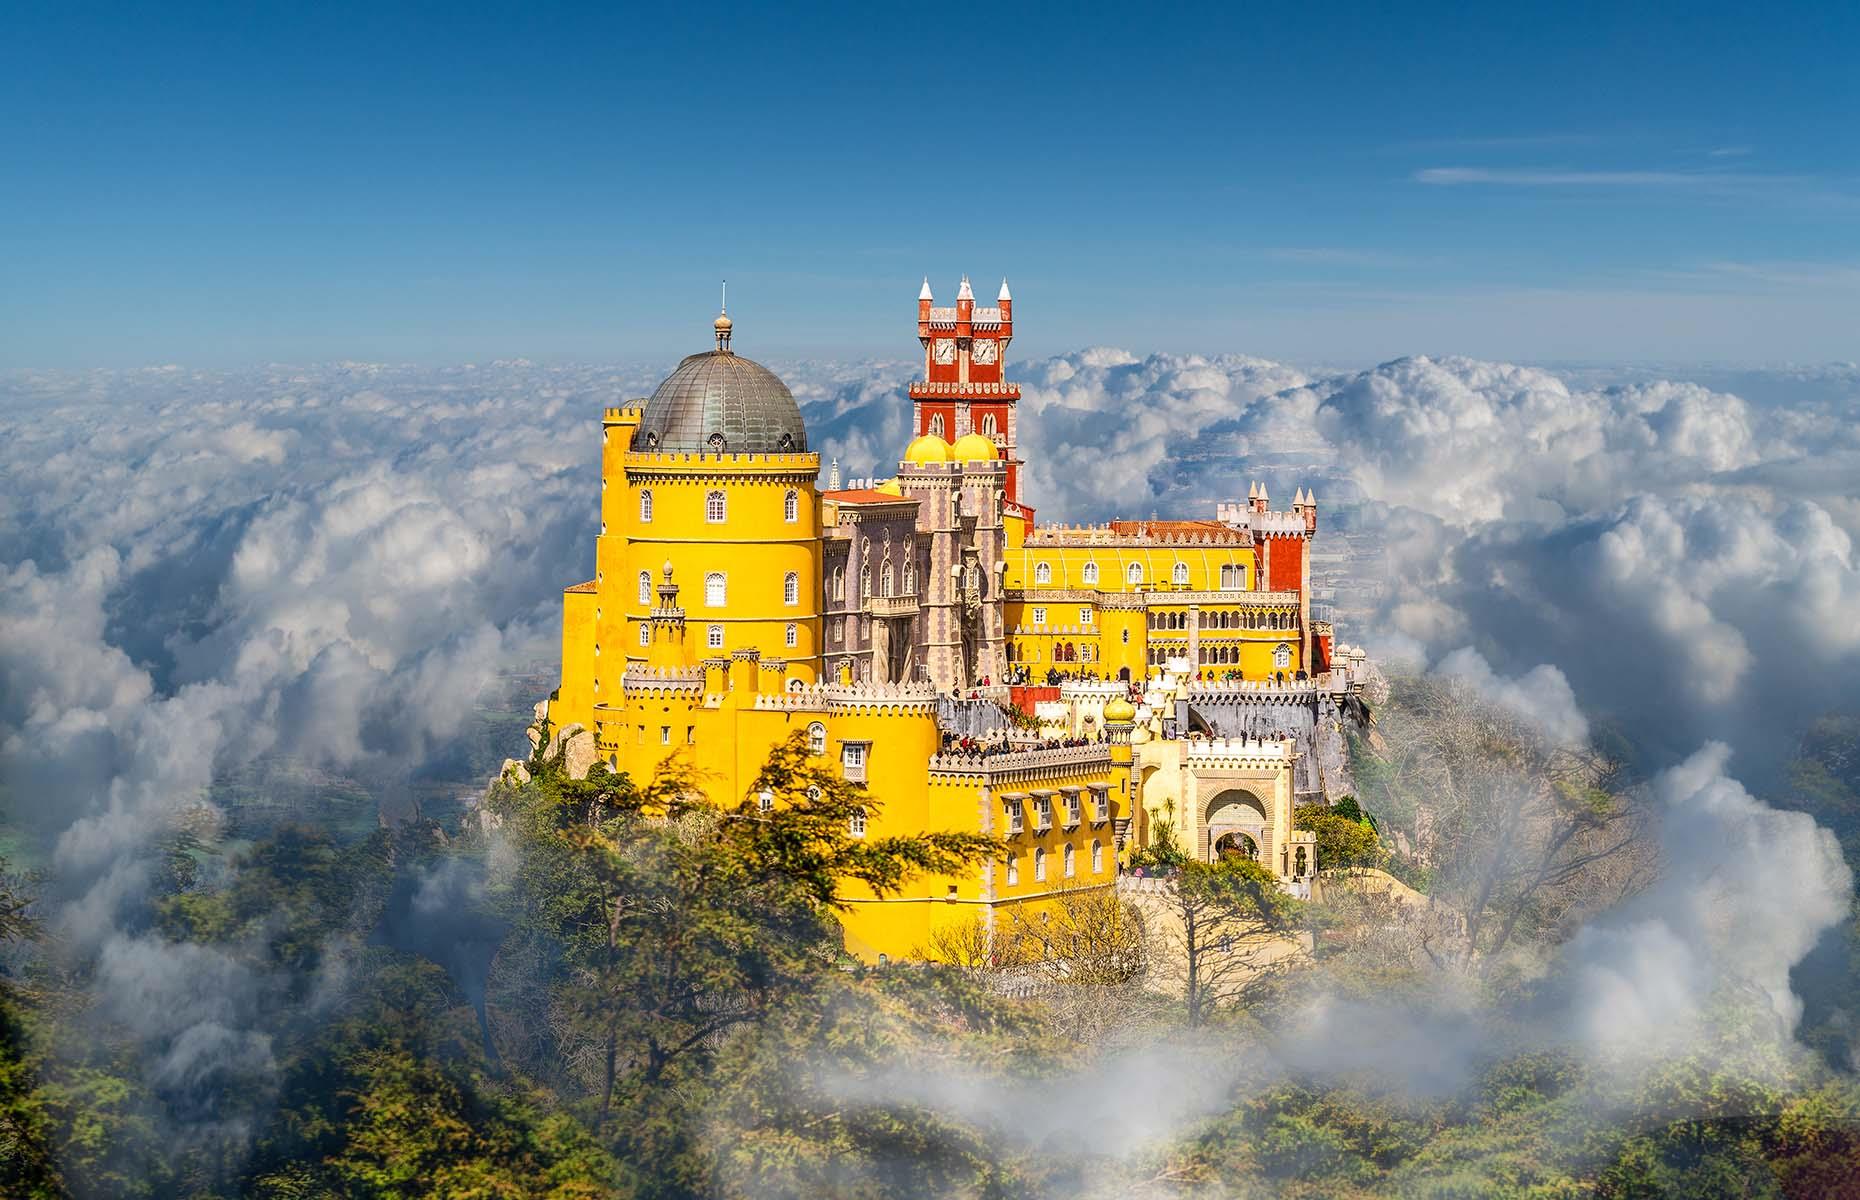 <p>It might be called a palace, but Pena Palace is in fact a castle, and few are so heart-flutteringly pretty. Its butter-yellow turrets and brick-red towers rise above the treetops in hilly Sintra, just outside Lisbon. The multicolored beauty, an example of 19th-century Romantic architecture, was commissioned by King Ferdinand II and completed in 1854, and has been home to Portuguese royals through the years.</p>  <p><a href="https://www.loveexploring.com/gallerylist/67038/europes-most-beautiful-castles"><strong>These are Europe's most beautiful castles</strong></a></p>